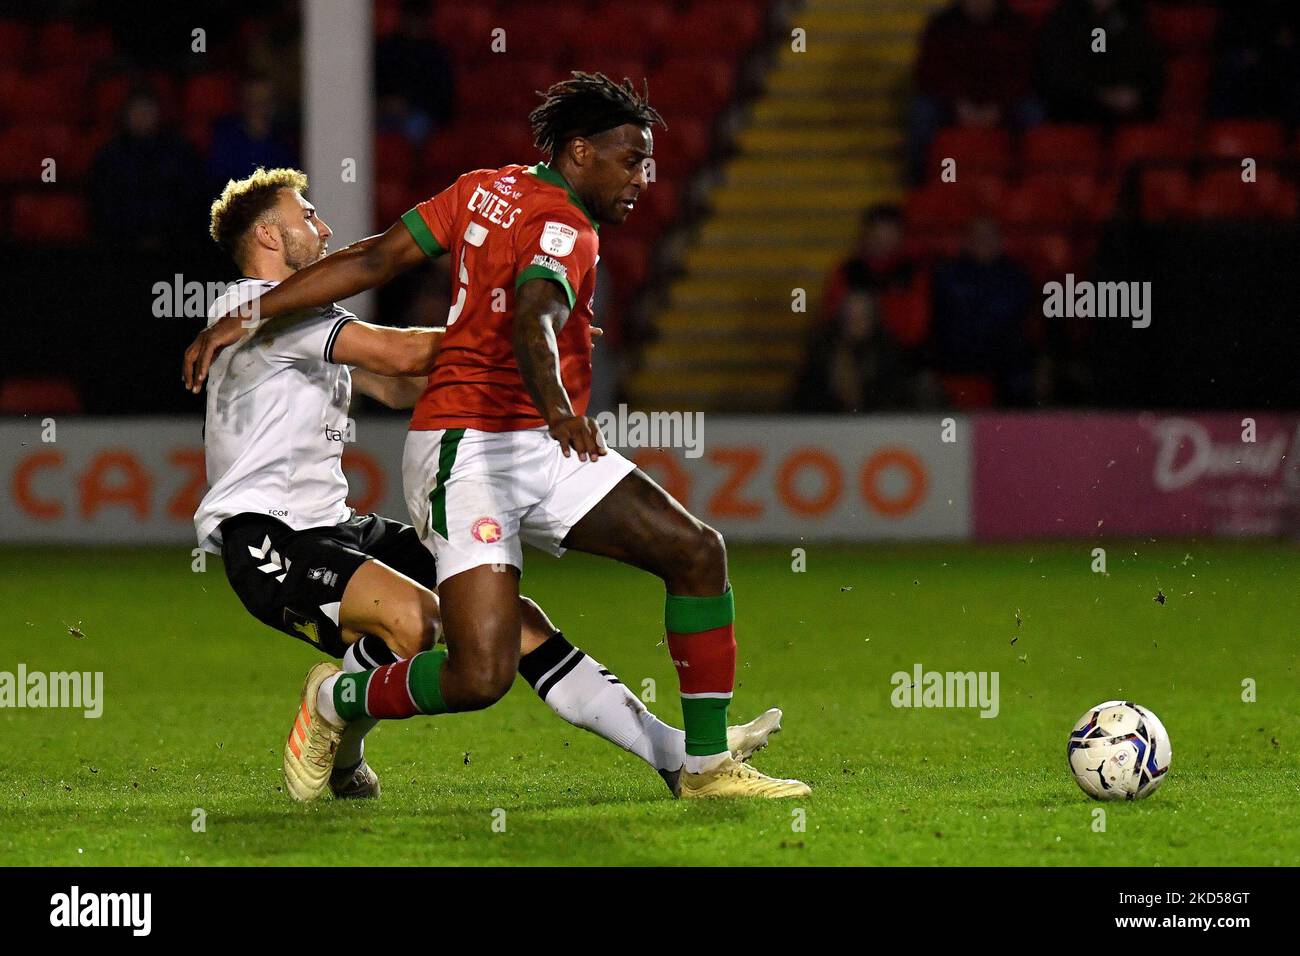 Oldham Athletic's Hallam Hope tussles with Donervon Daniels of Walsall Football Club during the Sky Bet League 2 match between Walsall and Oldham Athletic at the Banks's Stadium, Walsall on Tuesday 15th March 2022. (Photo by Eddie Garvey/MI News/NurPhoto) Stock Photo